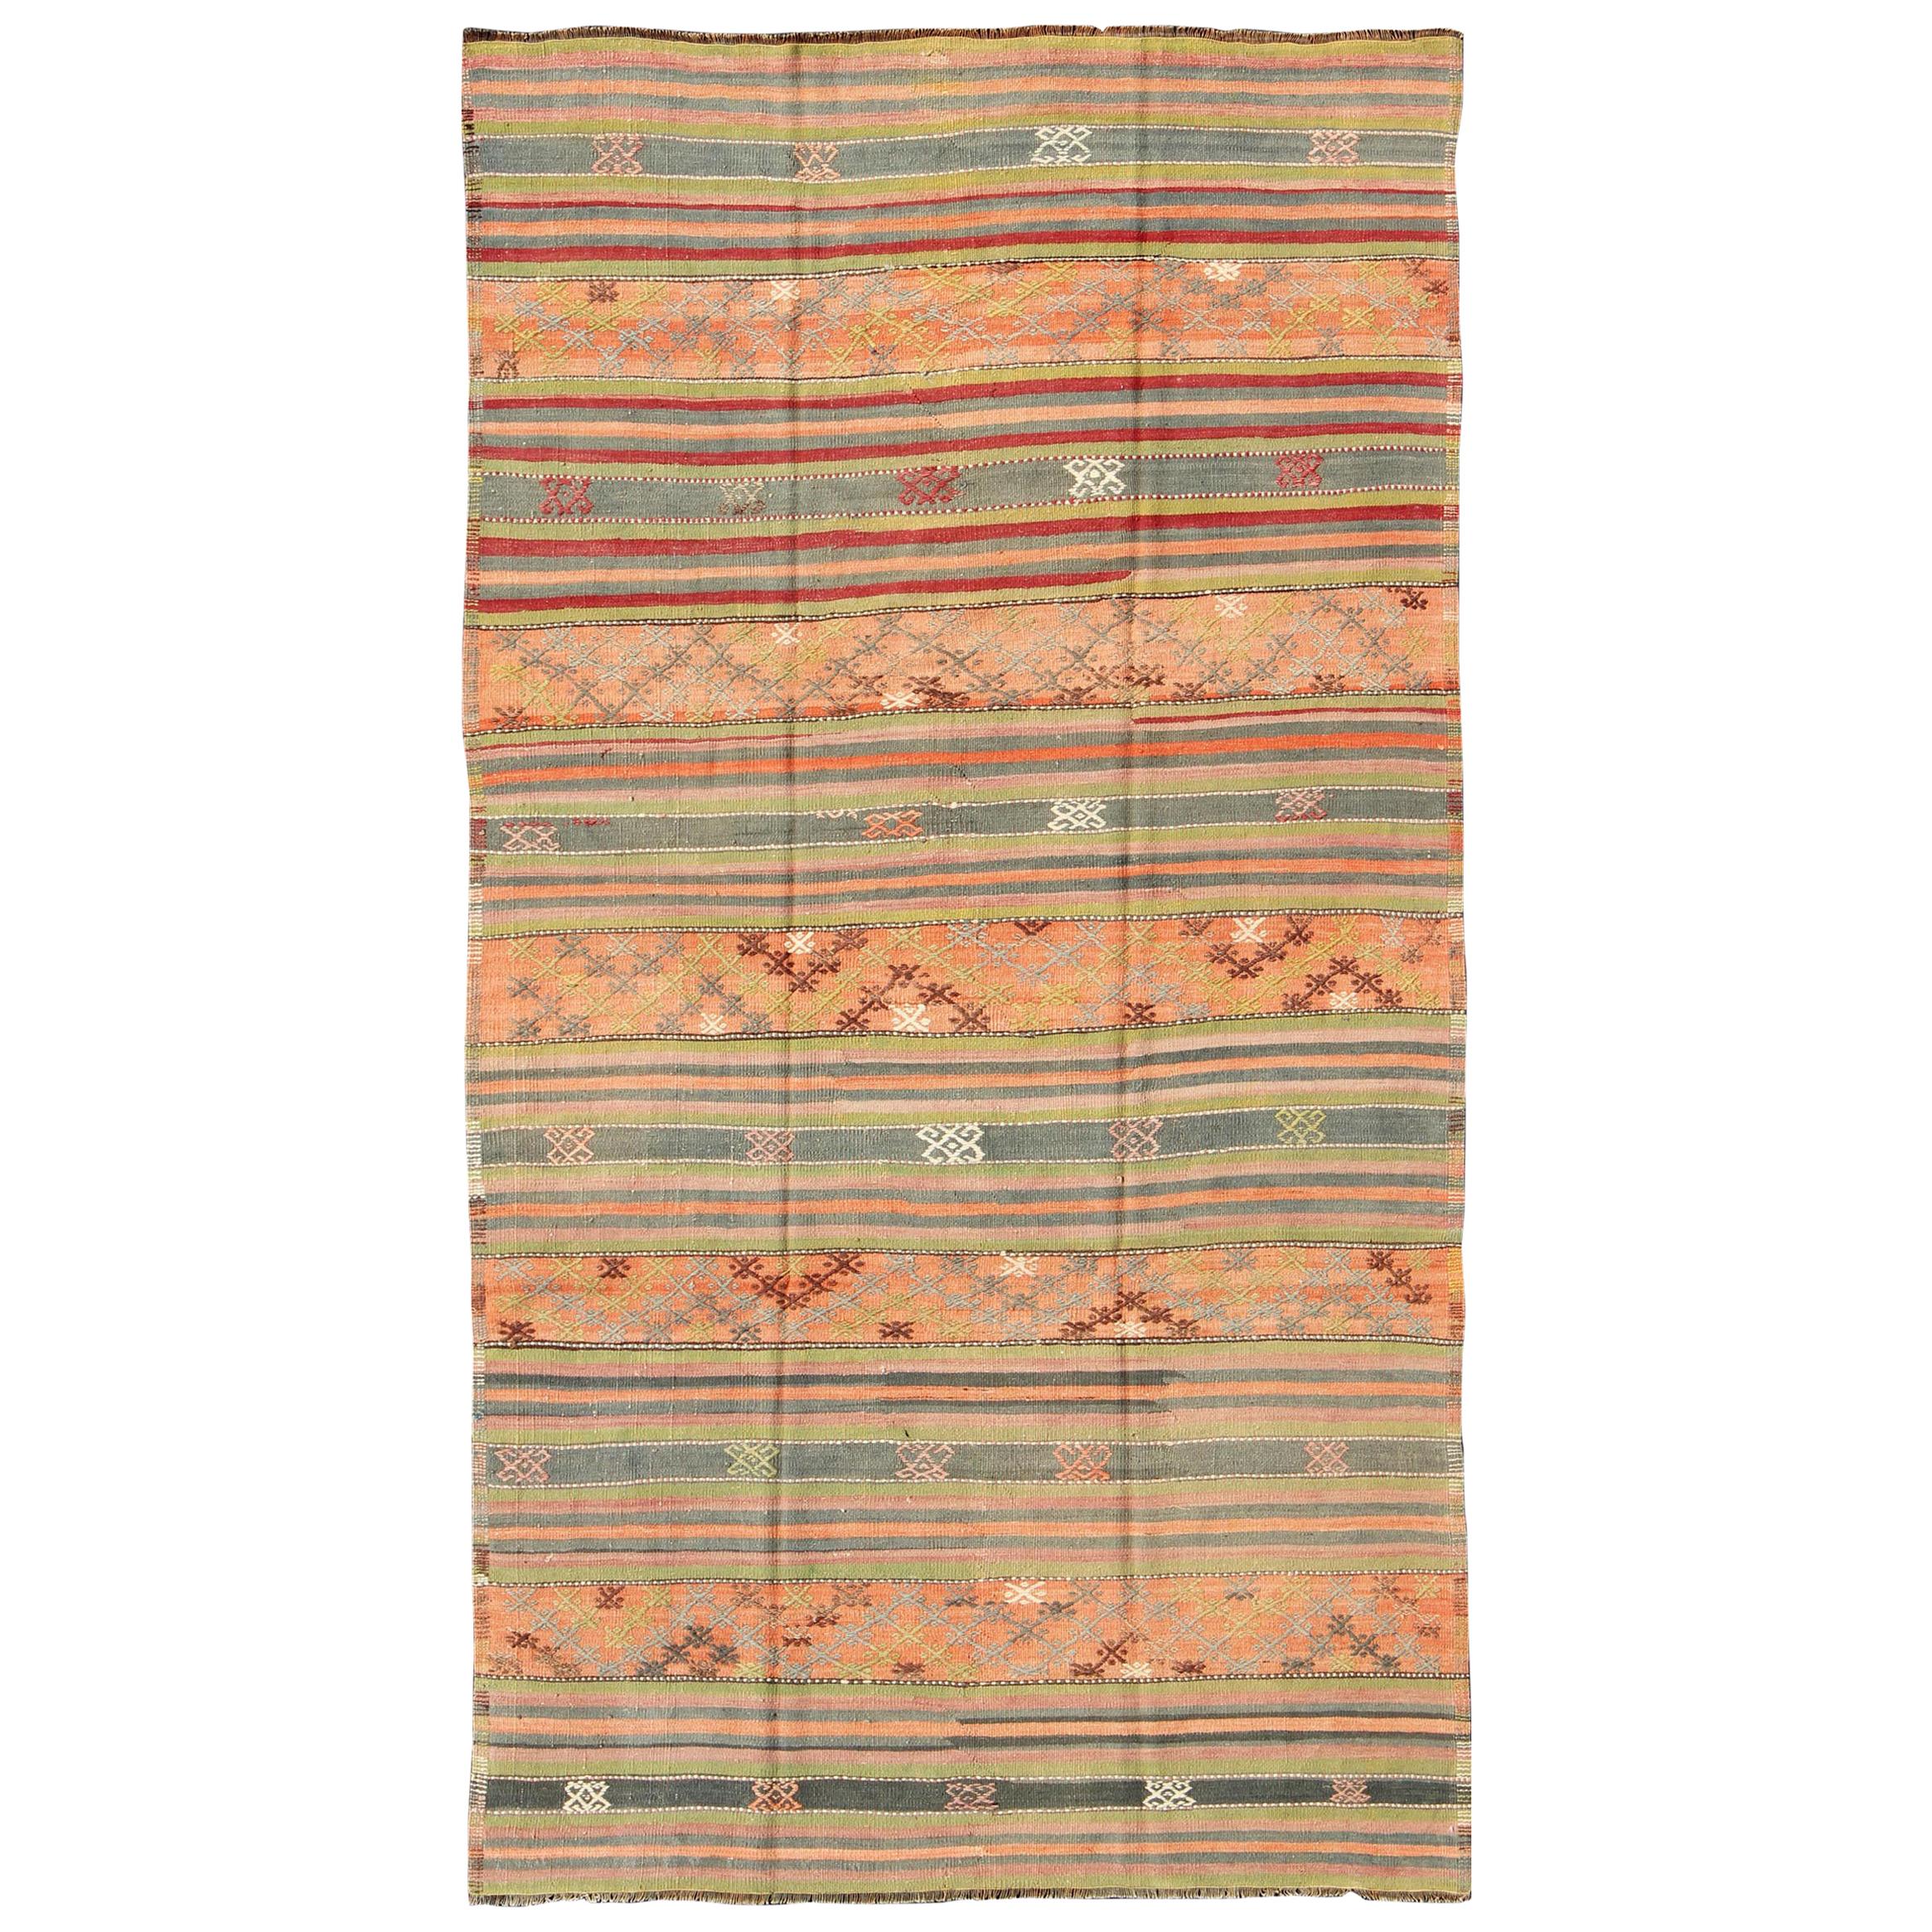 Vintage Turkish Kilim Rug with Geometric Shapes and Colorful Stripes For Sale